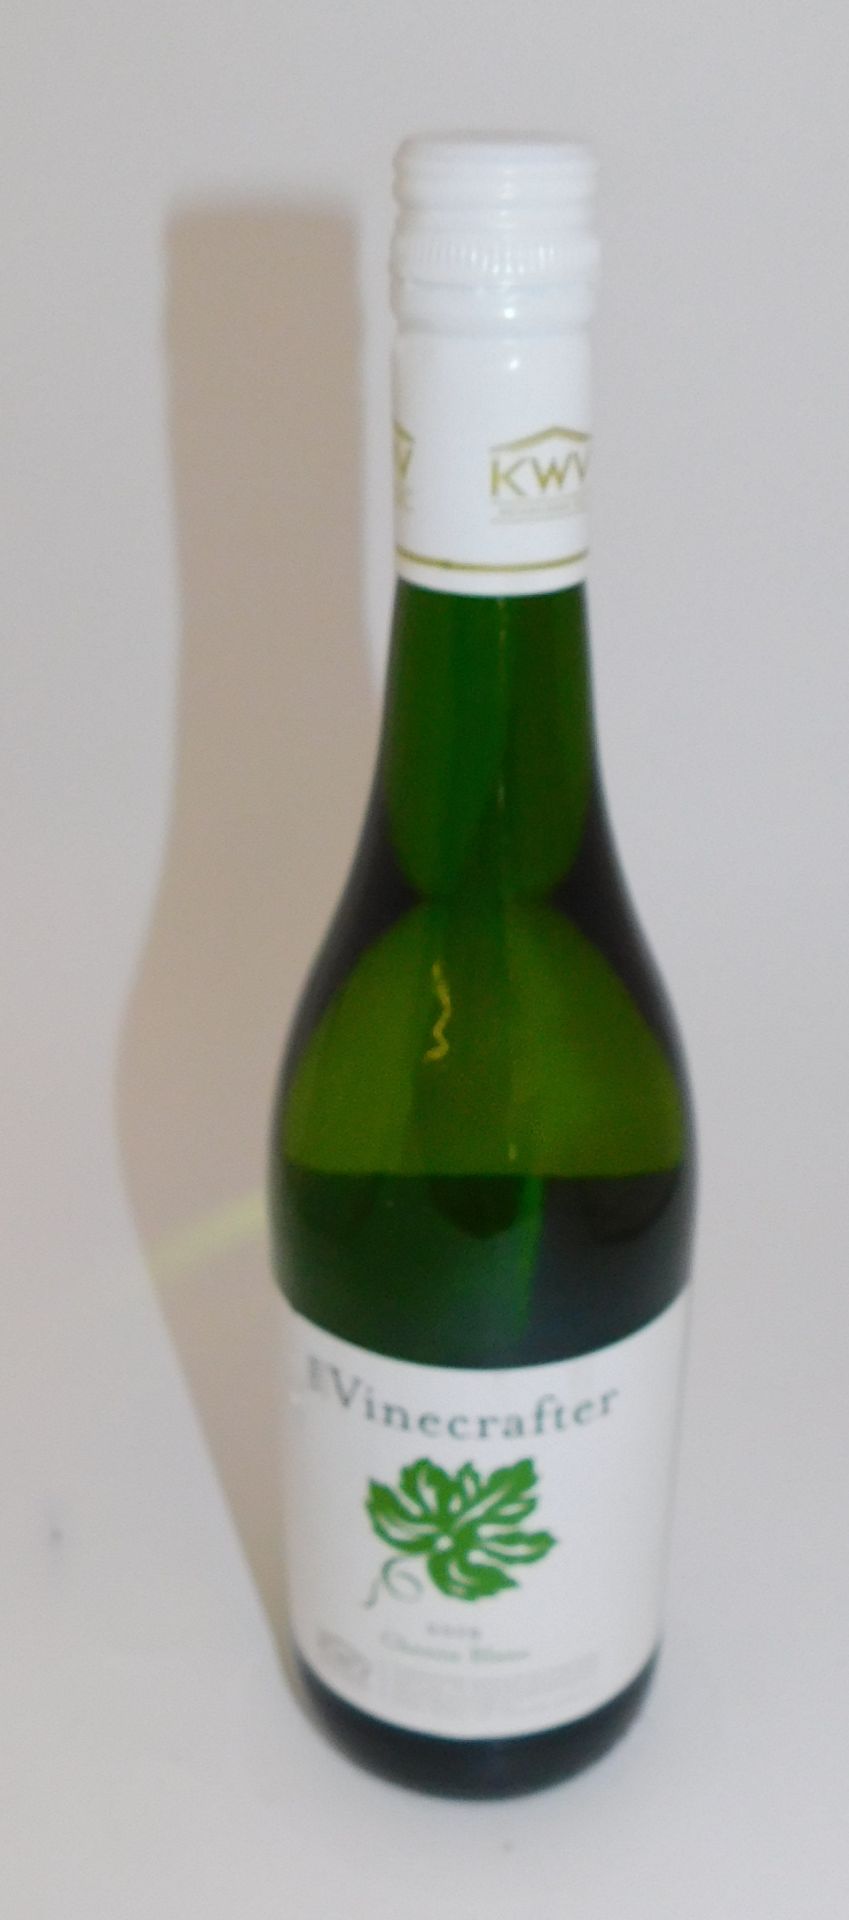 24 Bottles The Vinecrafter Chenin Blanc, 750ml (Located Stockport – See General Notes for More